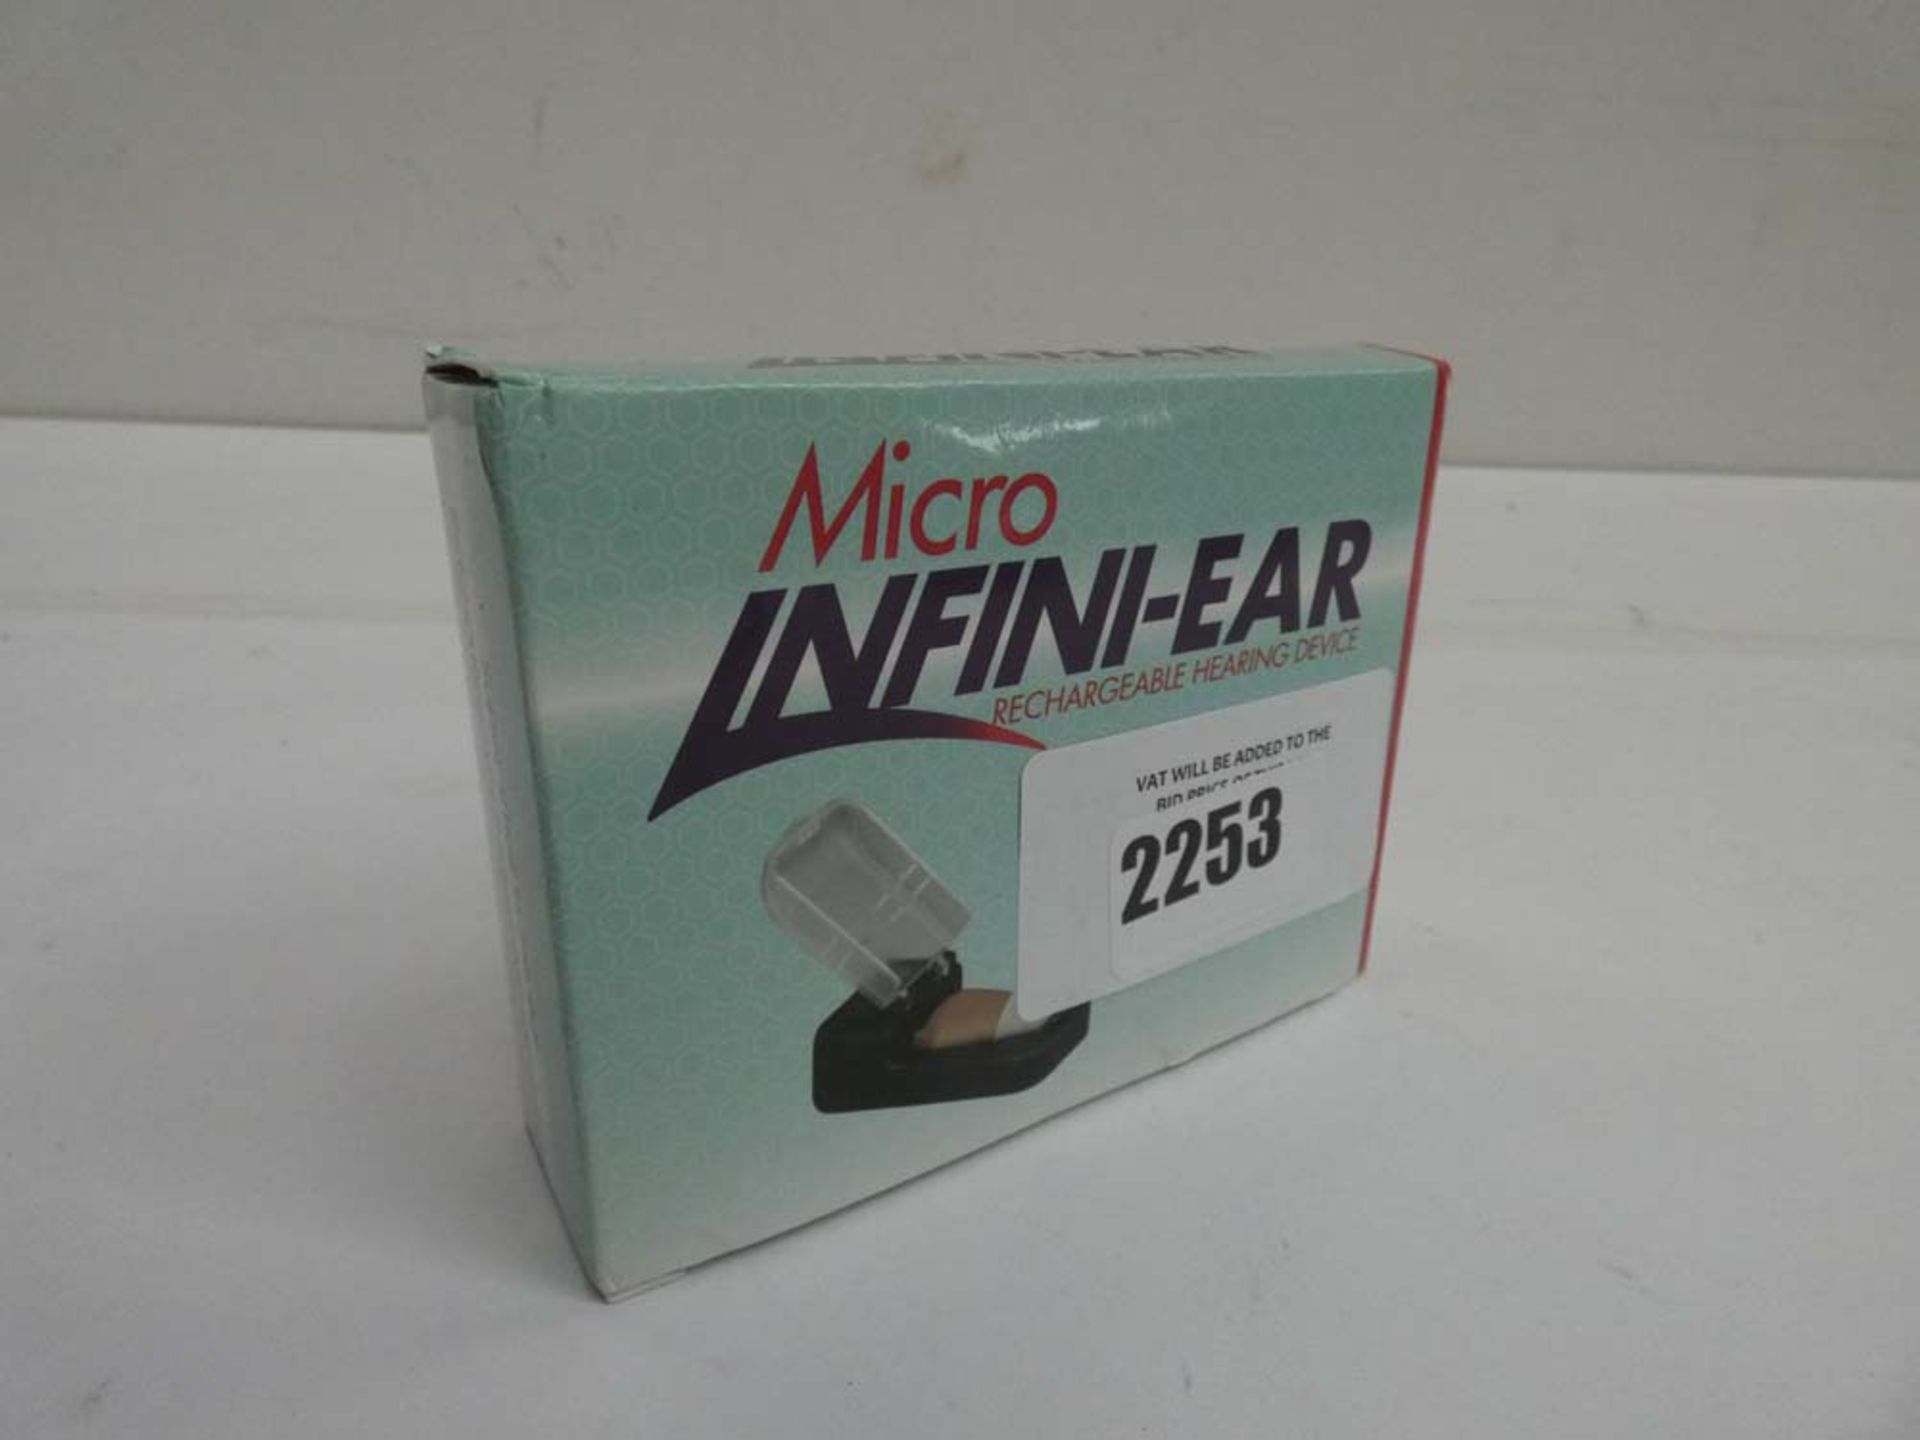 Micro Infini-Ear rechargeable hearing device